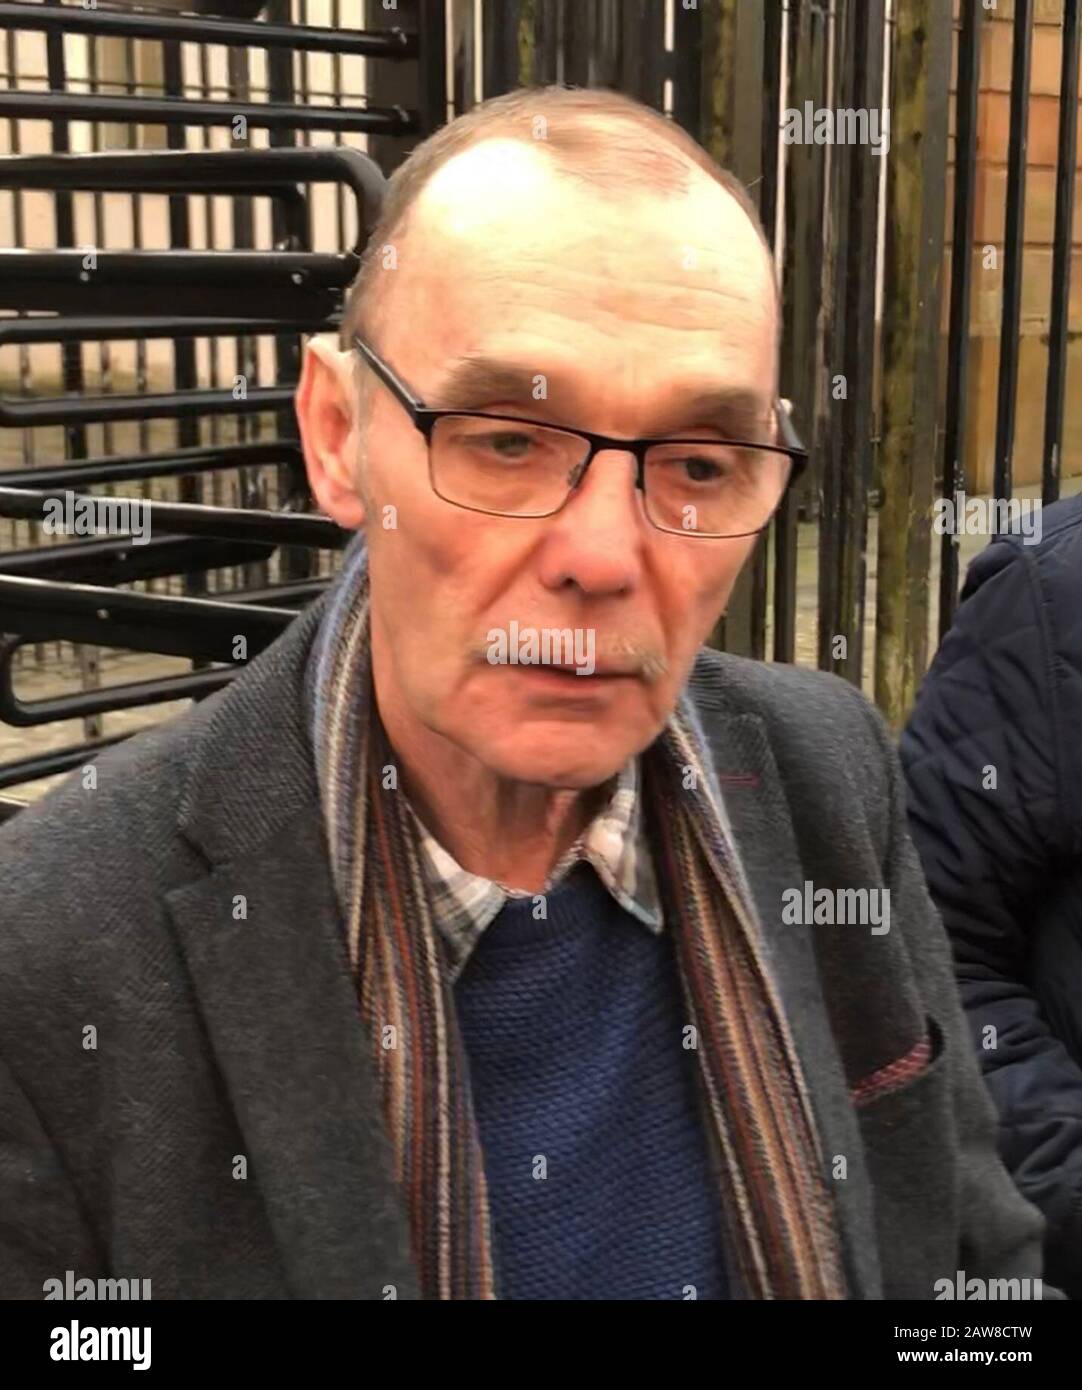 Liam Wray, whose brother James Wray was killed on Bloody Sunday, outside Bishop Street court house in Londonderry for the case involving 'Soldier F'. The ex-paratrooper is accused of murdering James Wray and William McKinney on January 30, 1972 when troops opened fire on civil rights demonstrators. Stock Photo